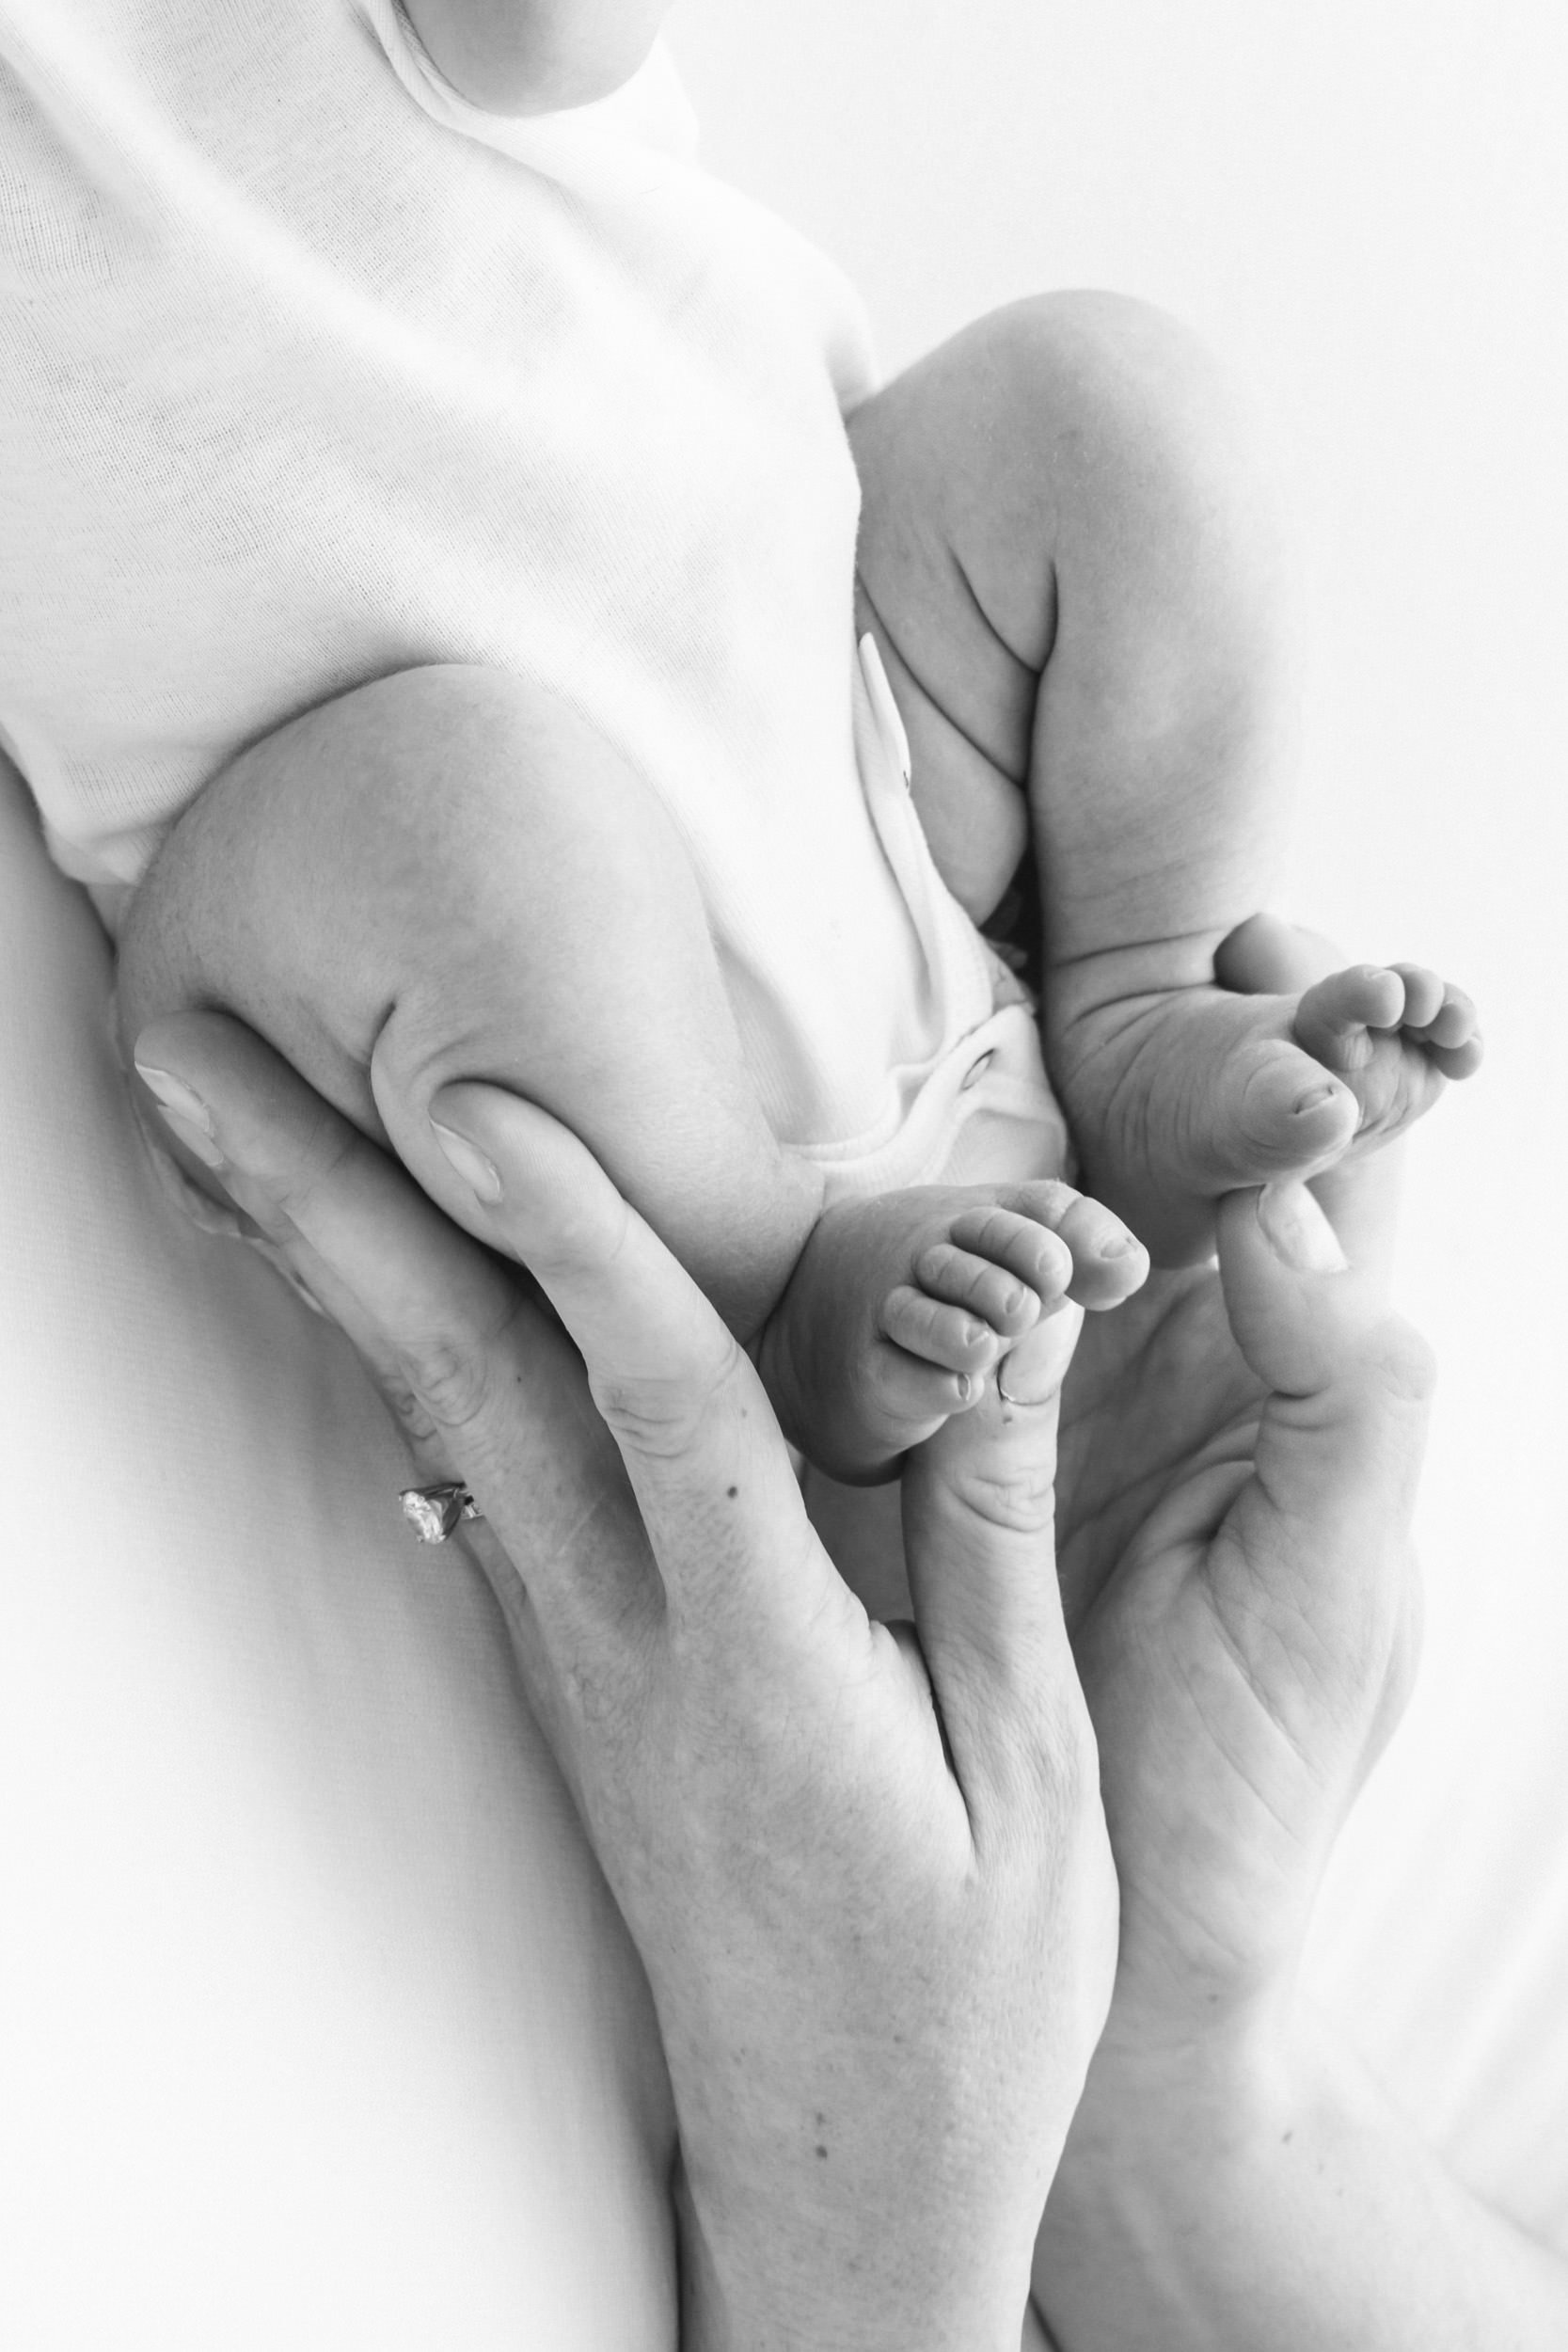  Black and white portrait of newborn baby feet at a studio in New Jersey by Nicole Hawkins Photography. baby feet newborn details #NicoleHawkinsPhotography #NicoleHawkinsNewborns #StudioPhotography #NewYorkPhotographer #NJphotographers #newborn 